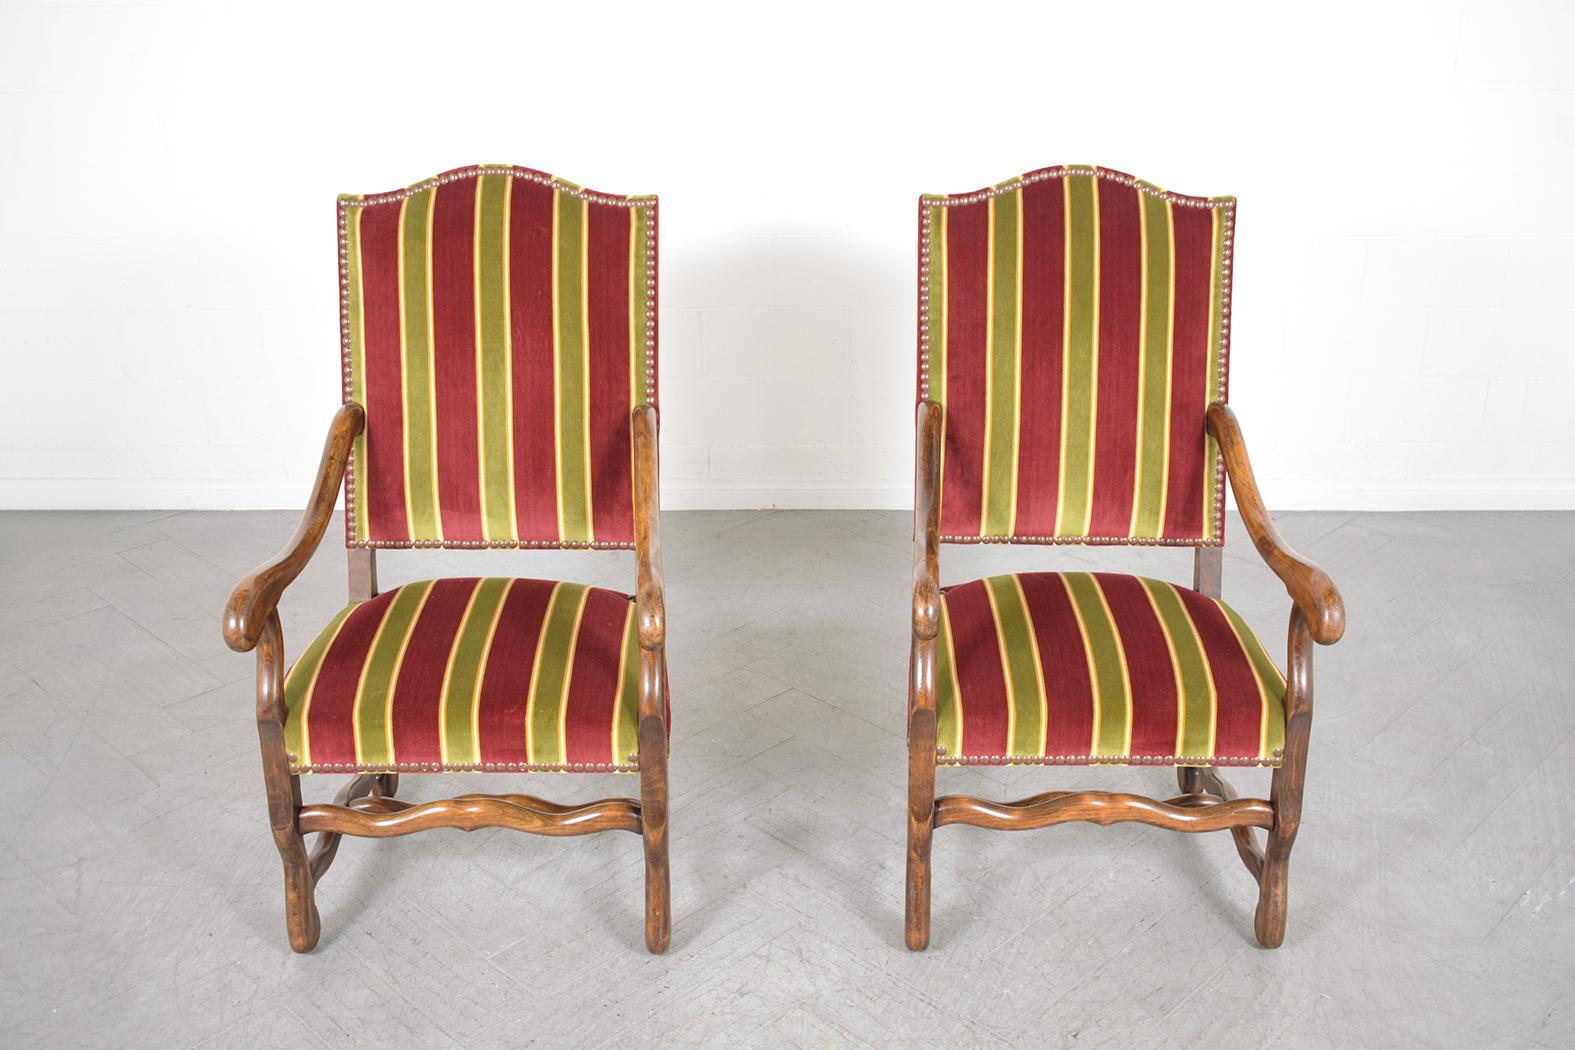 Carved 19th Century French Armchairs: Dark Walnut Finish with Striped Velvet Upholstery For Sale